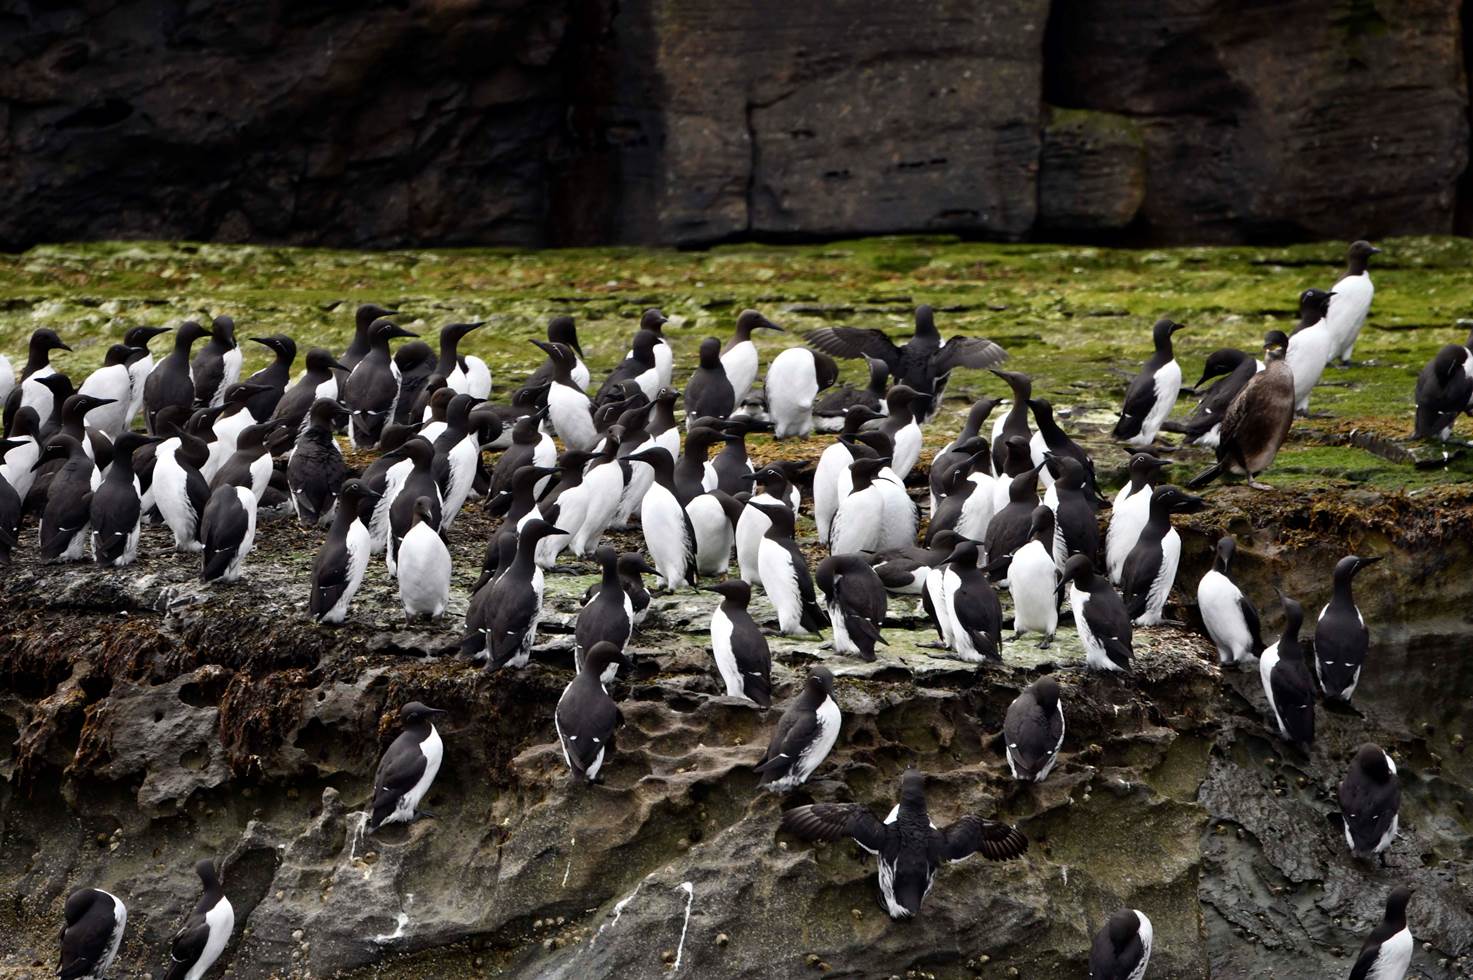 A large group of penguins

Description automatically generated